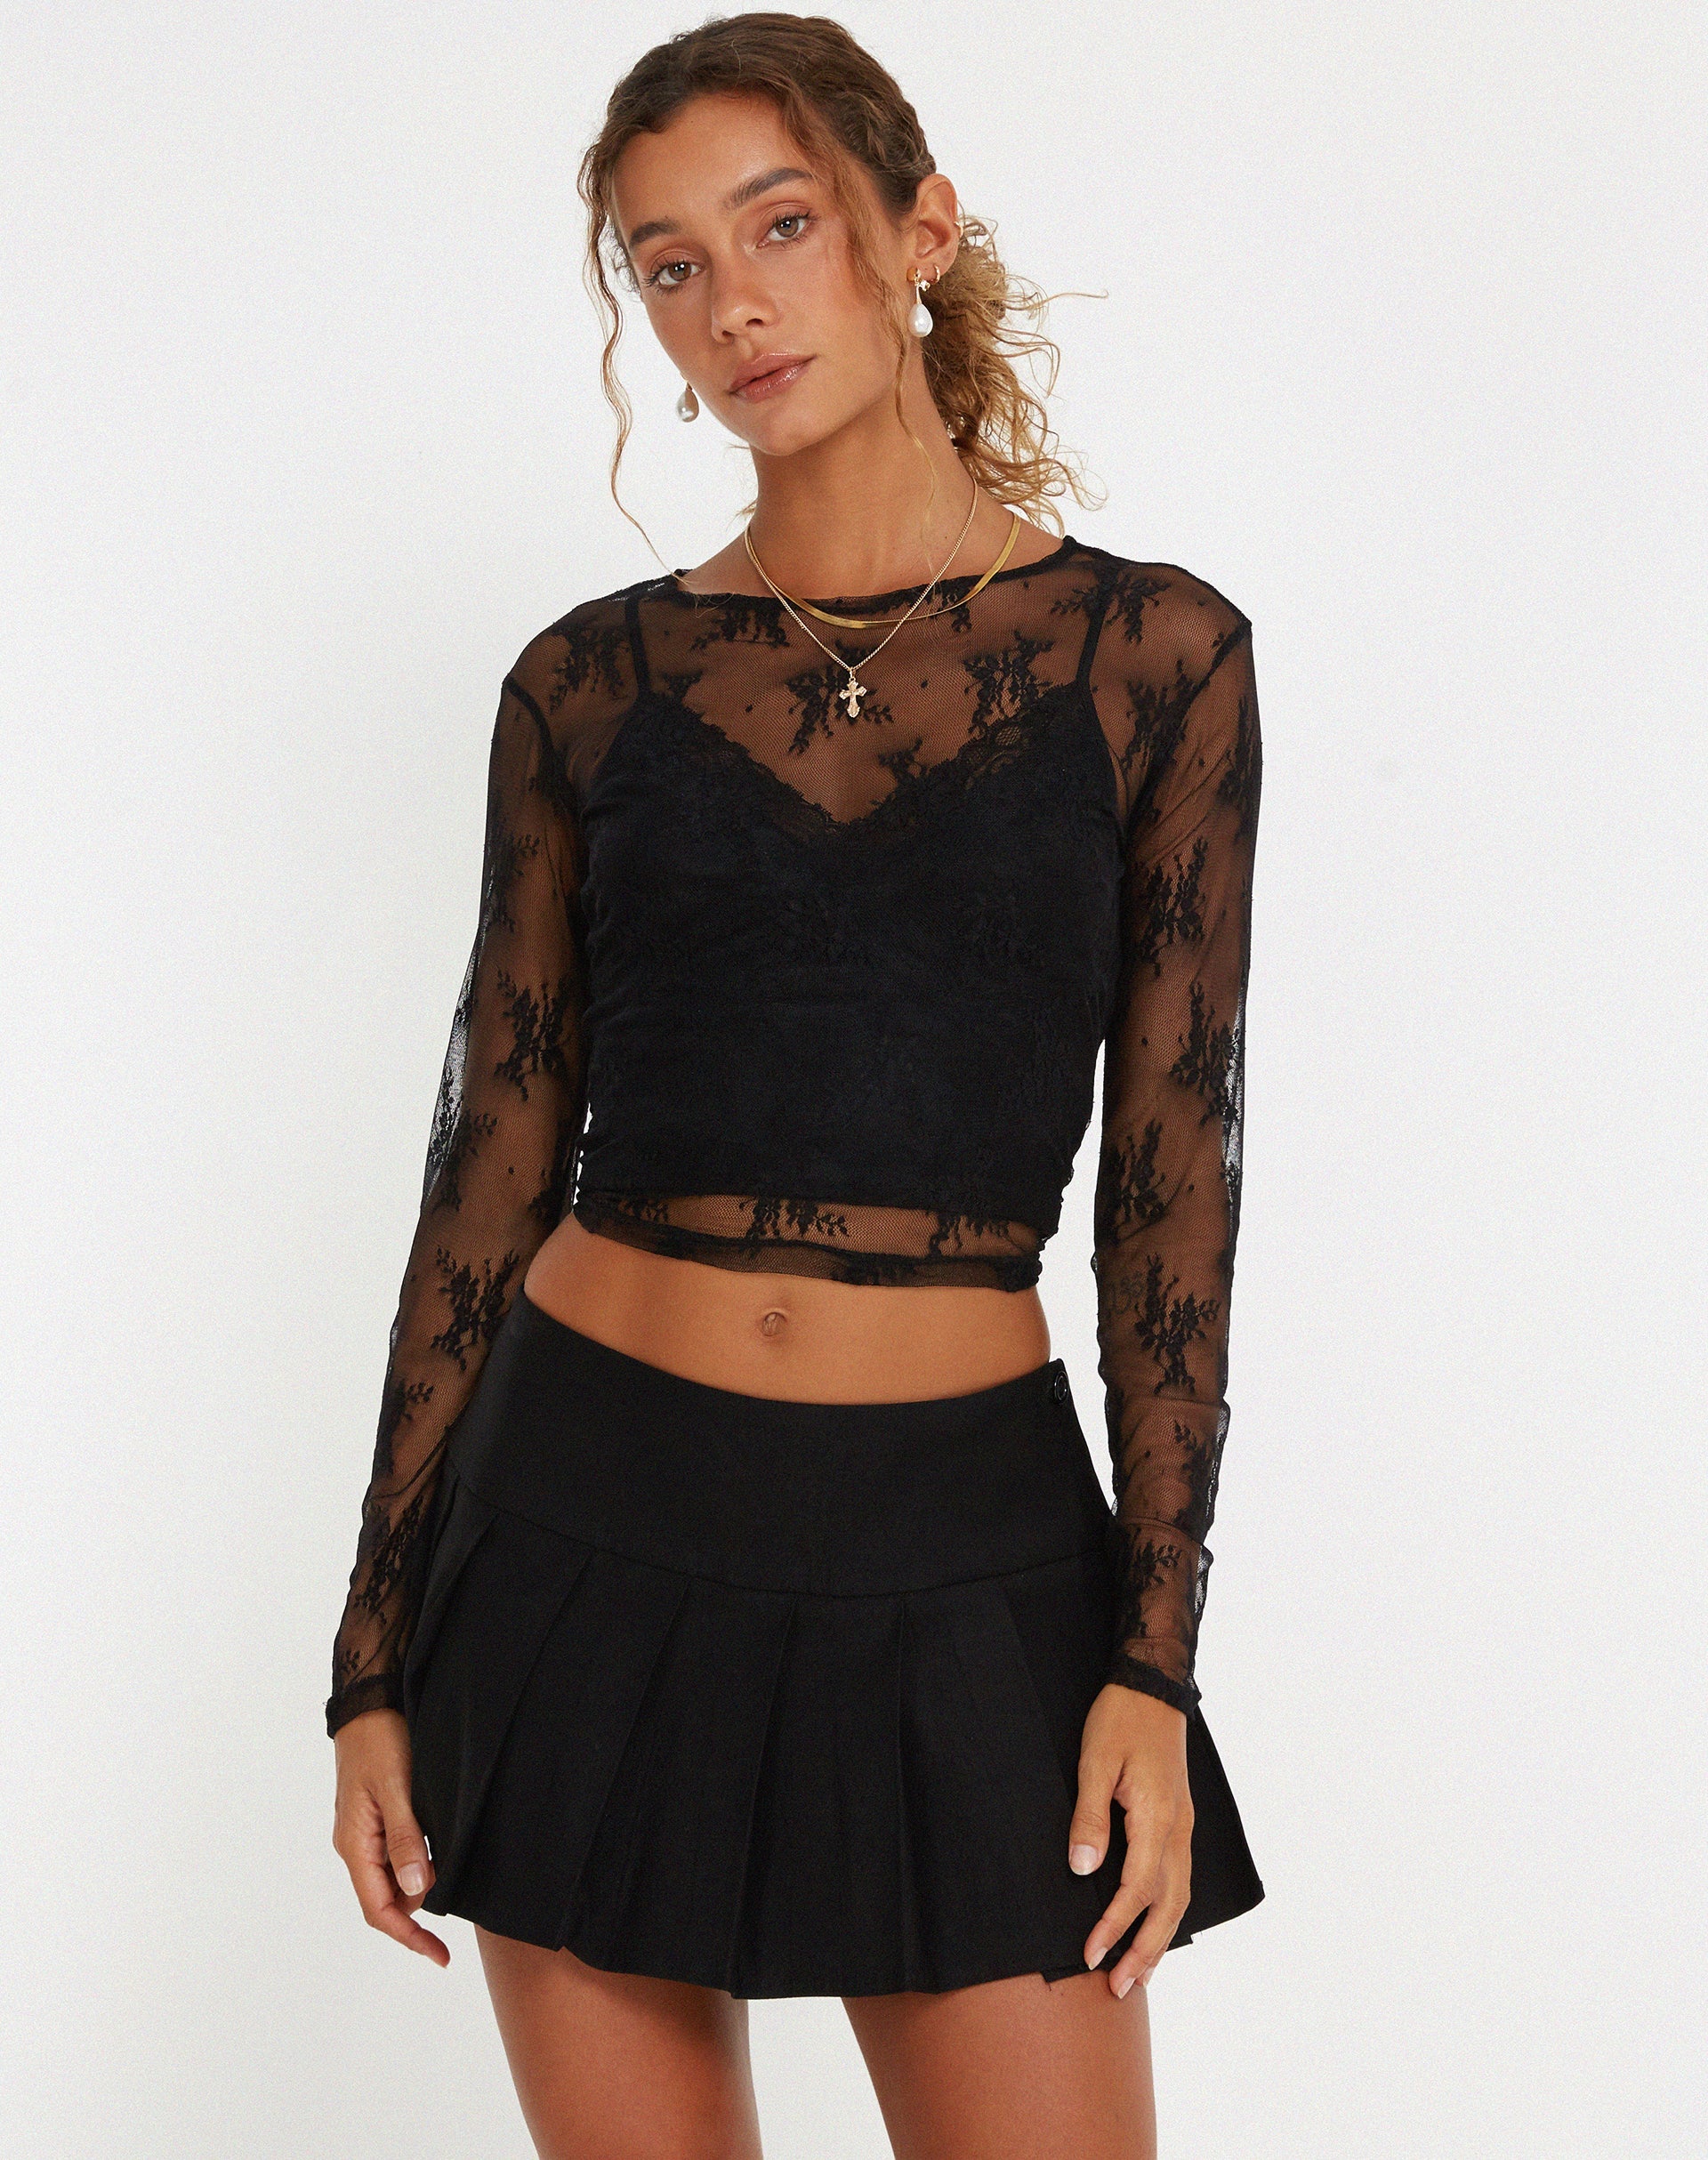 image of Bonca Long Sleeve Top in Lace Black